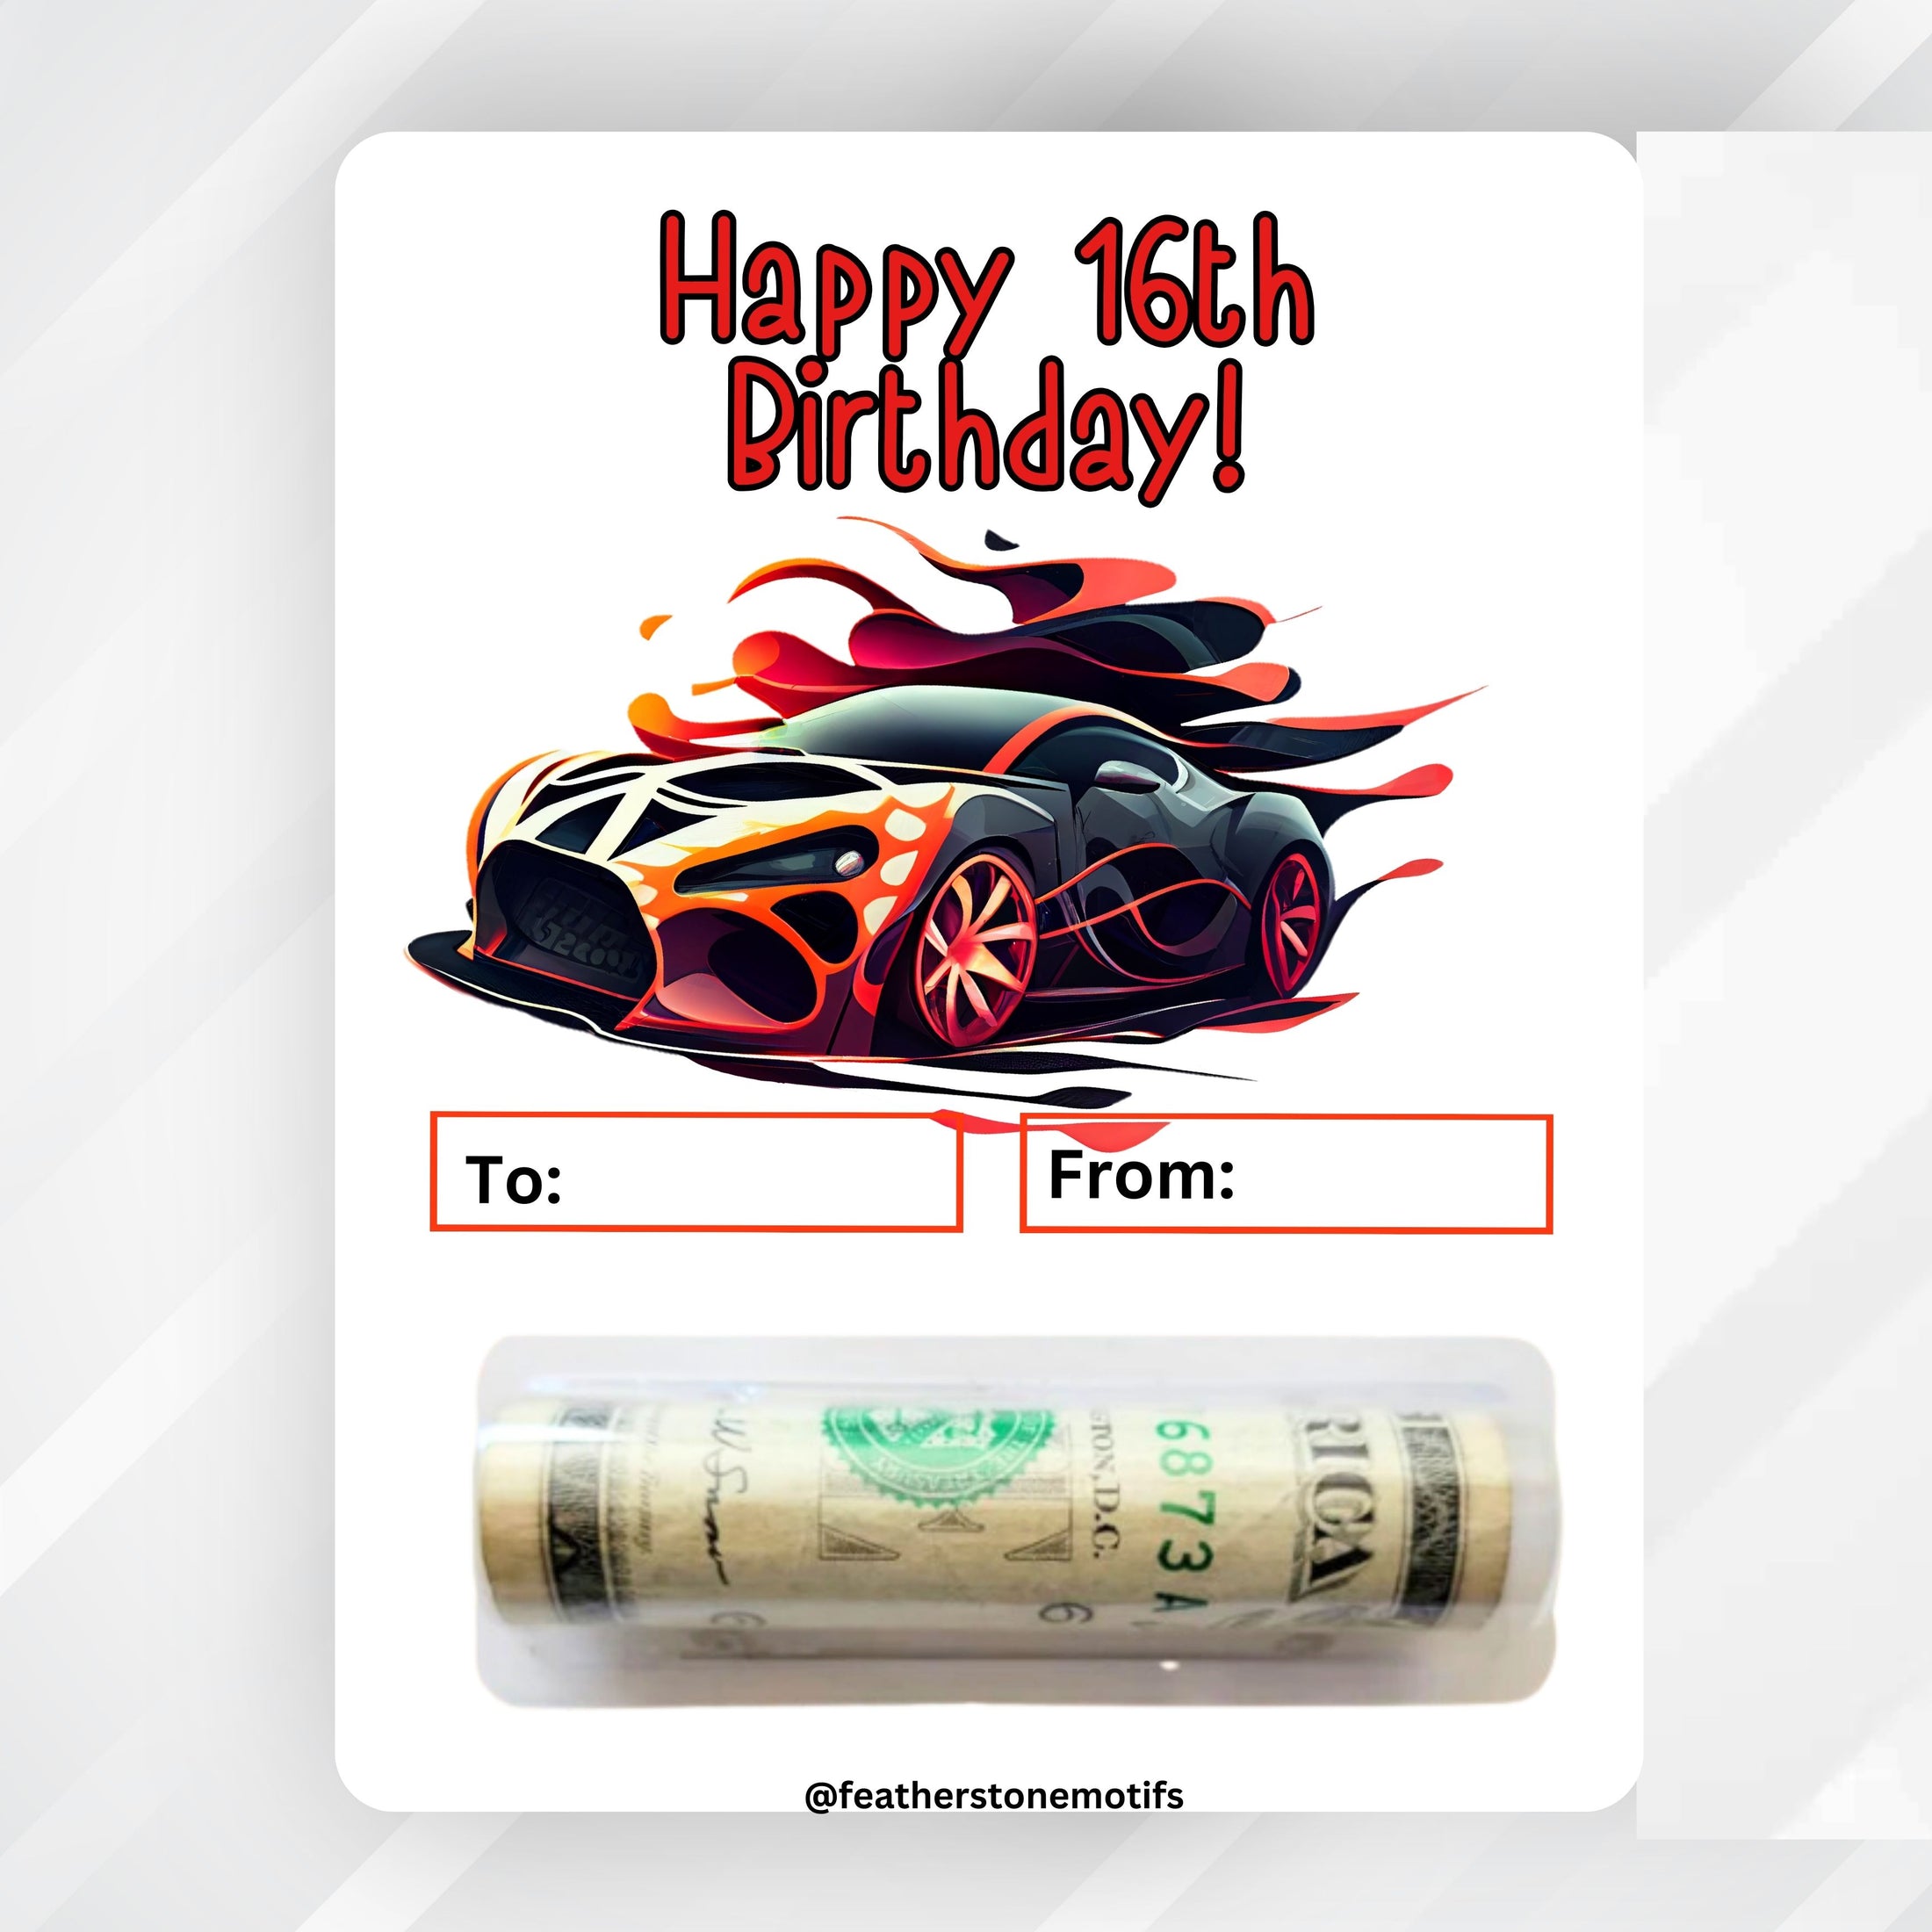 This image shows the money tube attached to the 16th Birthday Car Money Card.